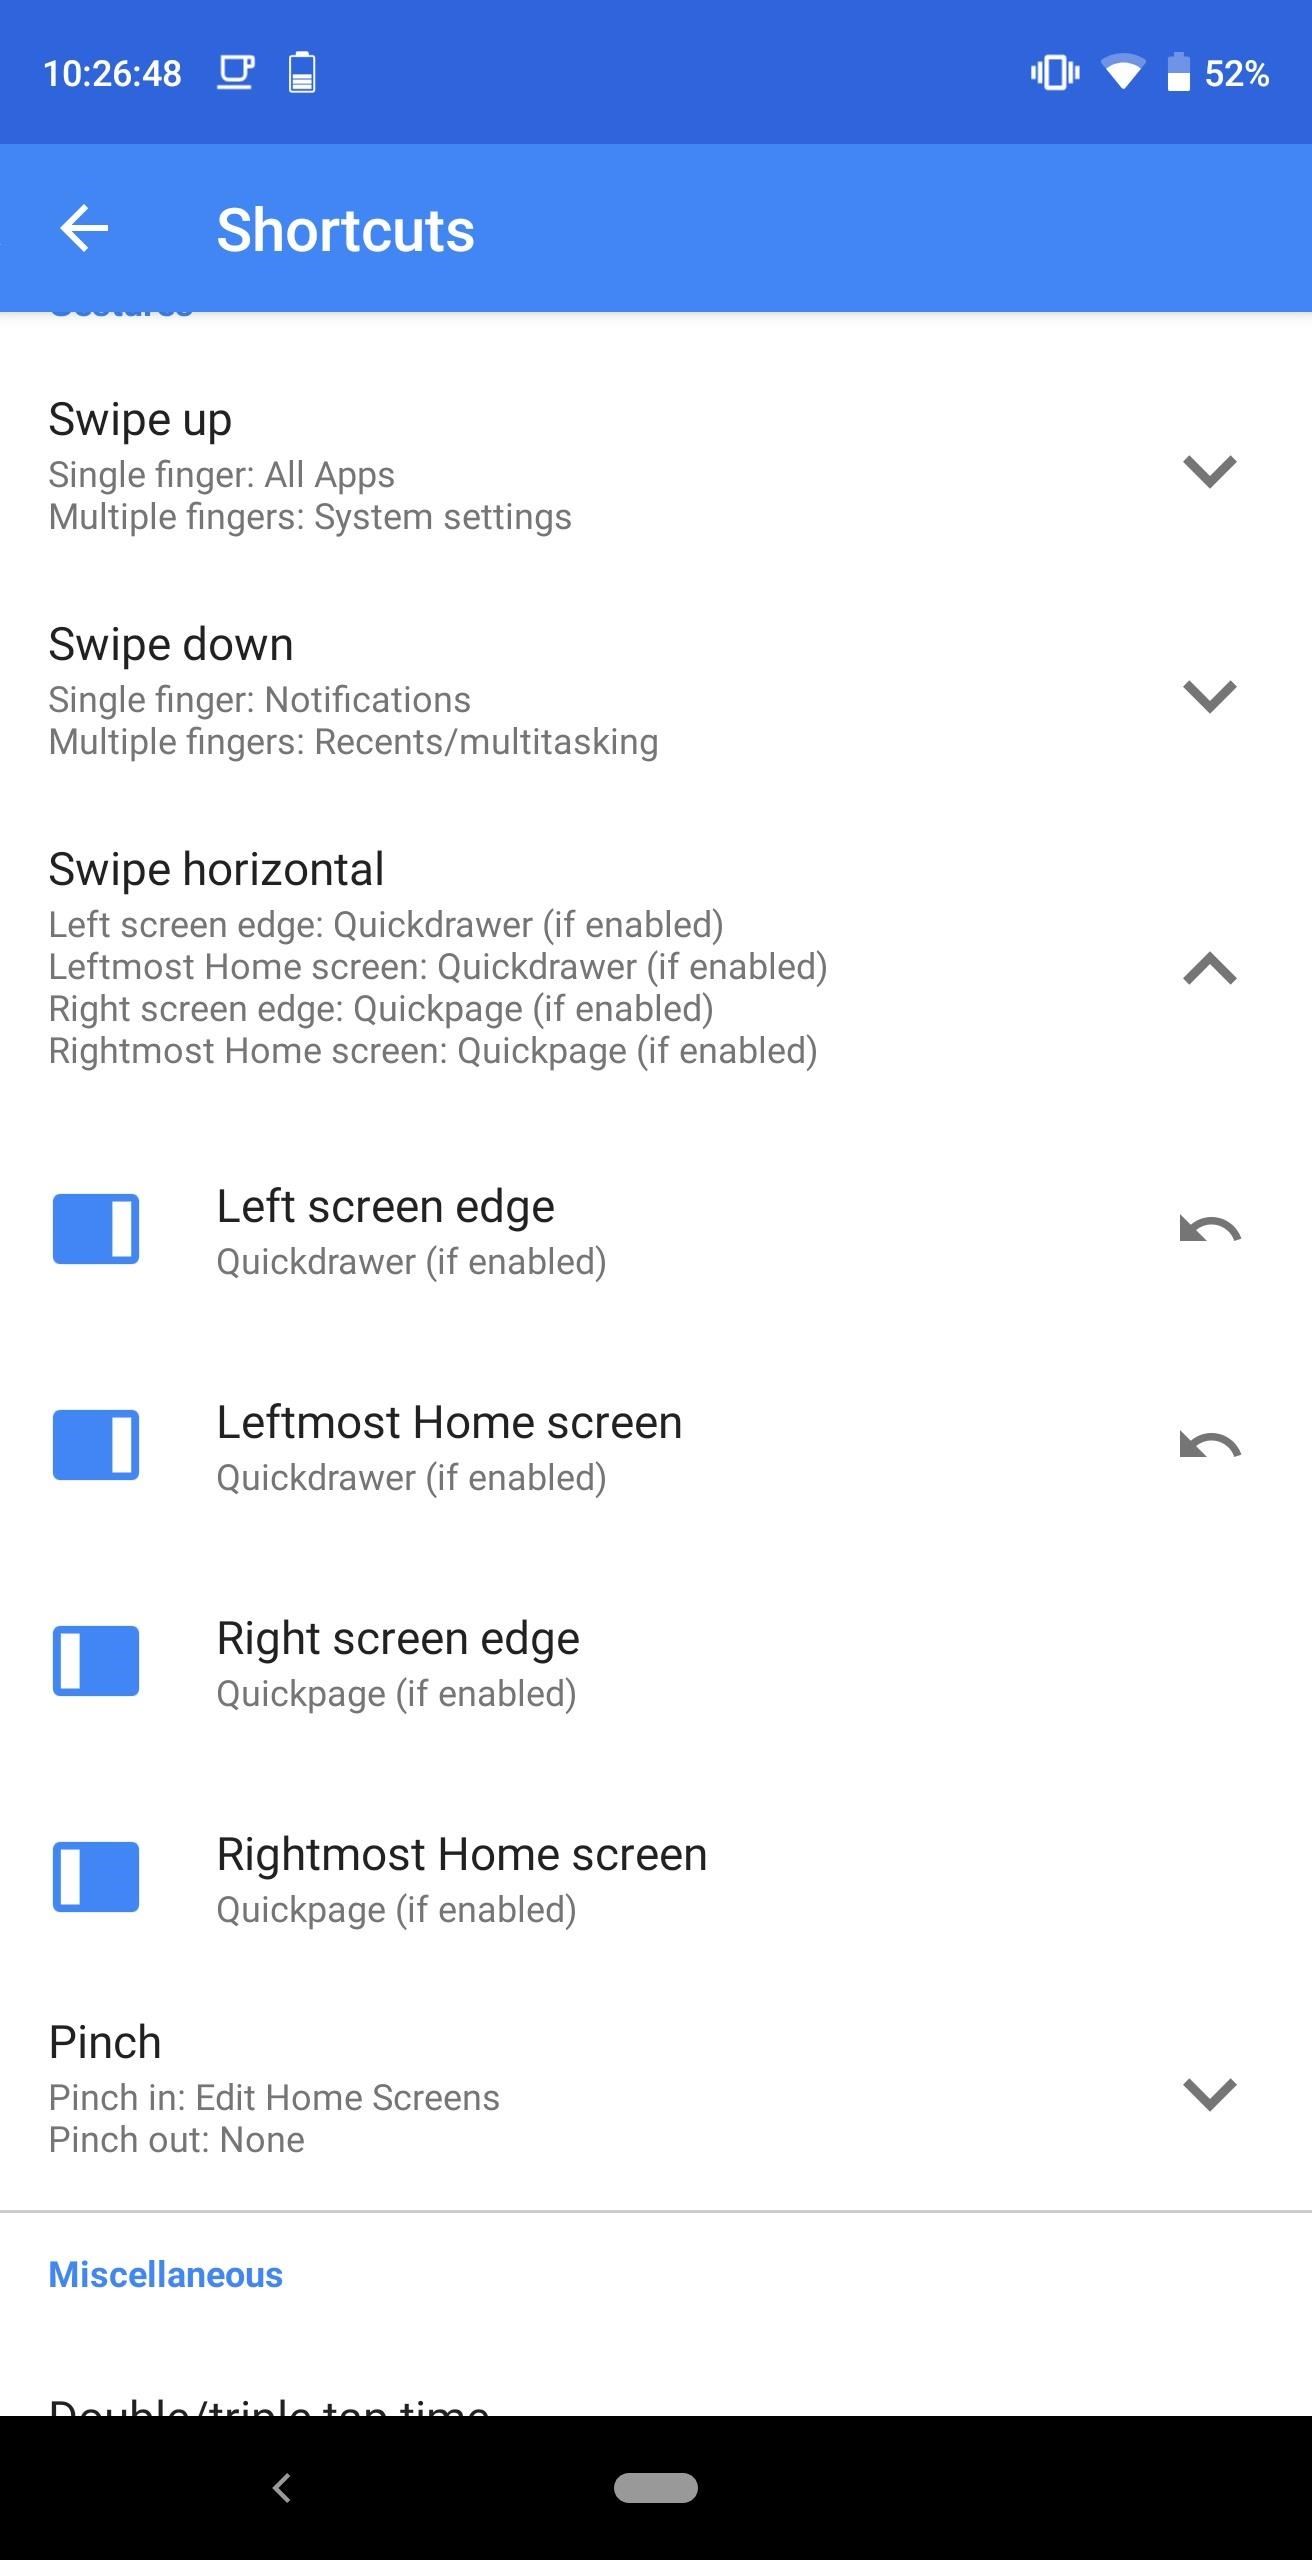 How to Use Quickdrawer & Google Now at the Same Time in Action Launcher